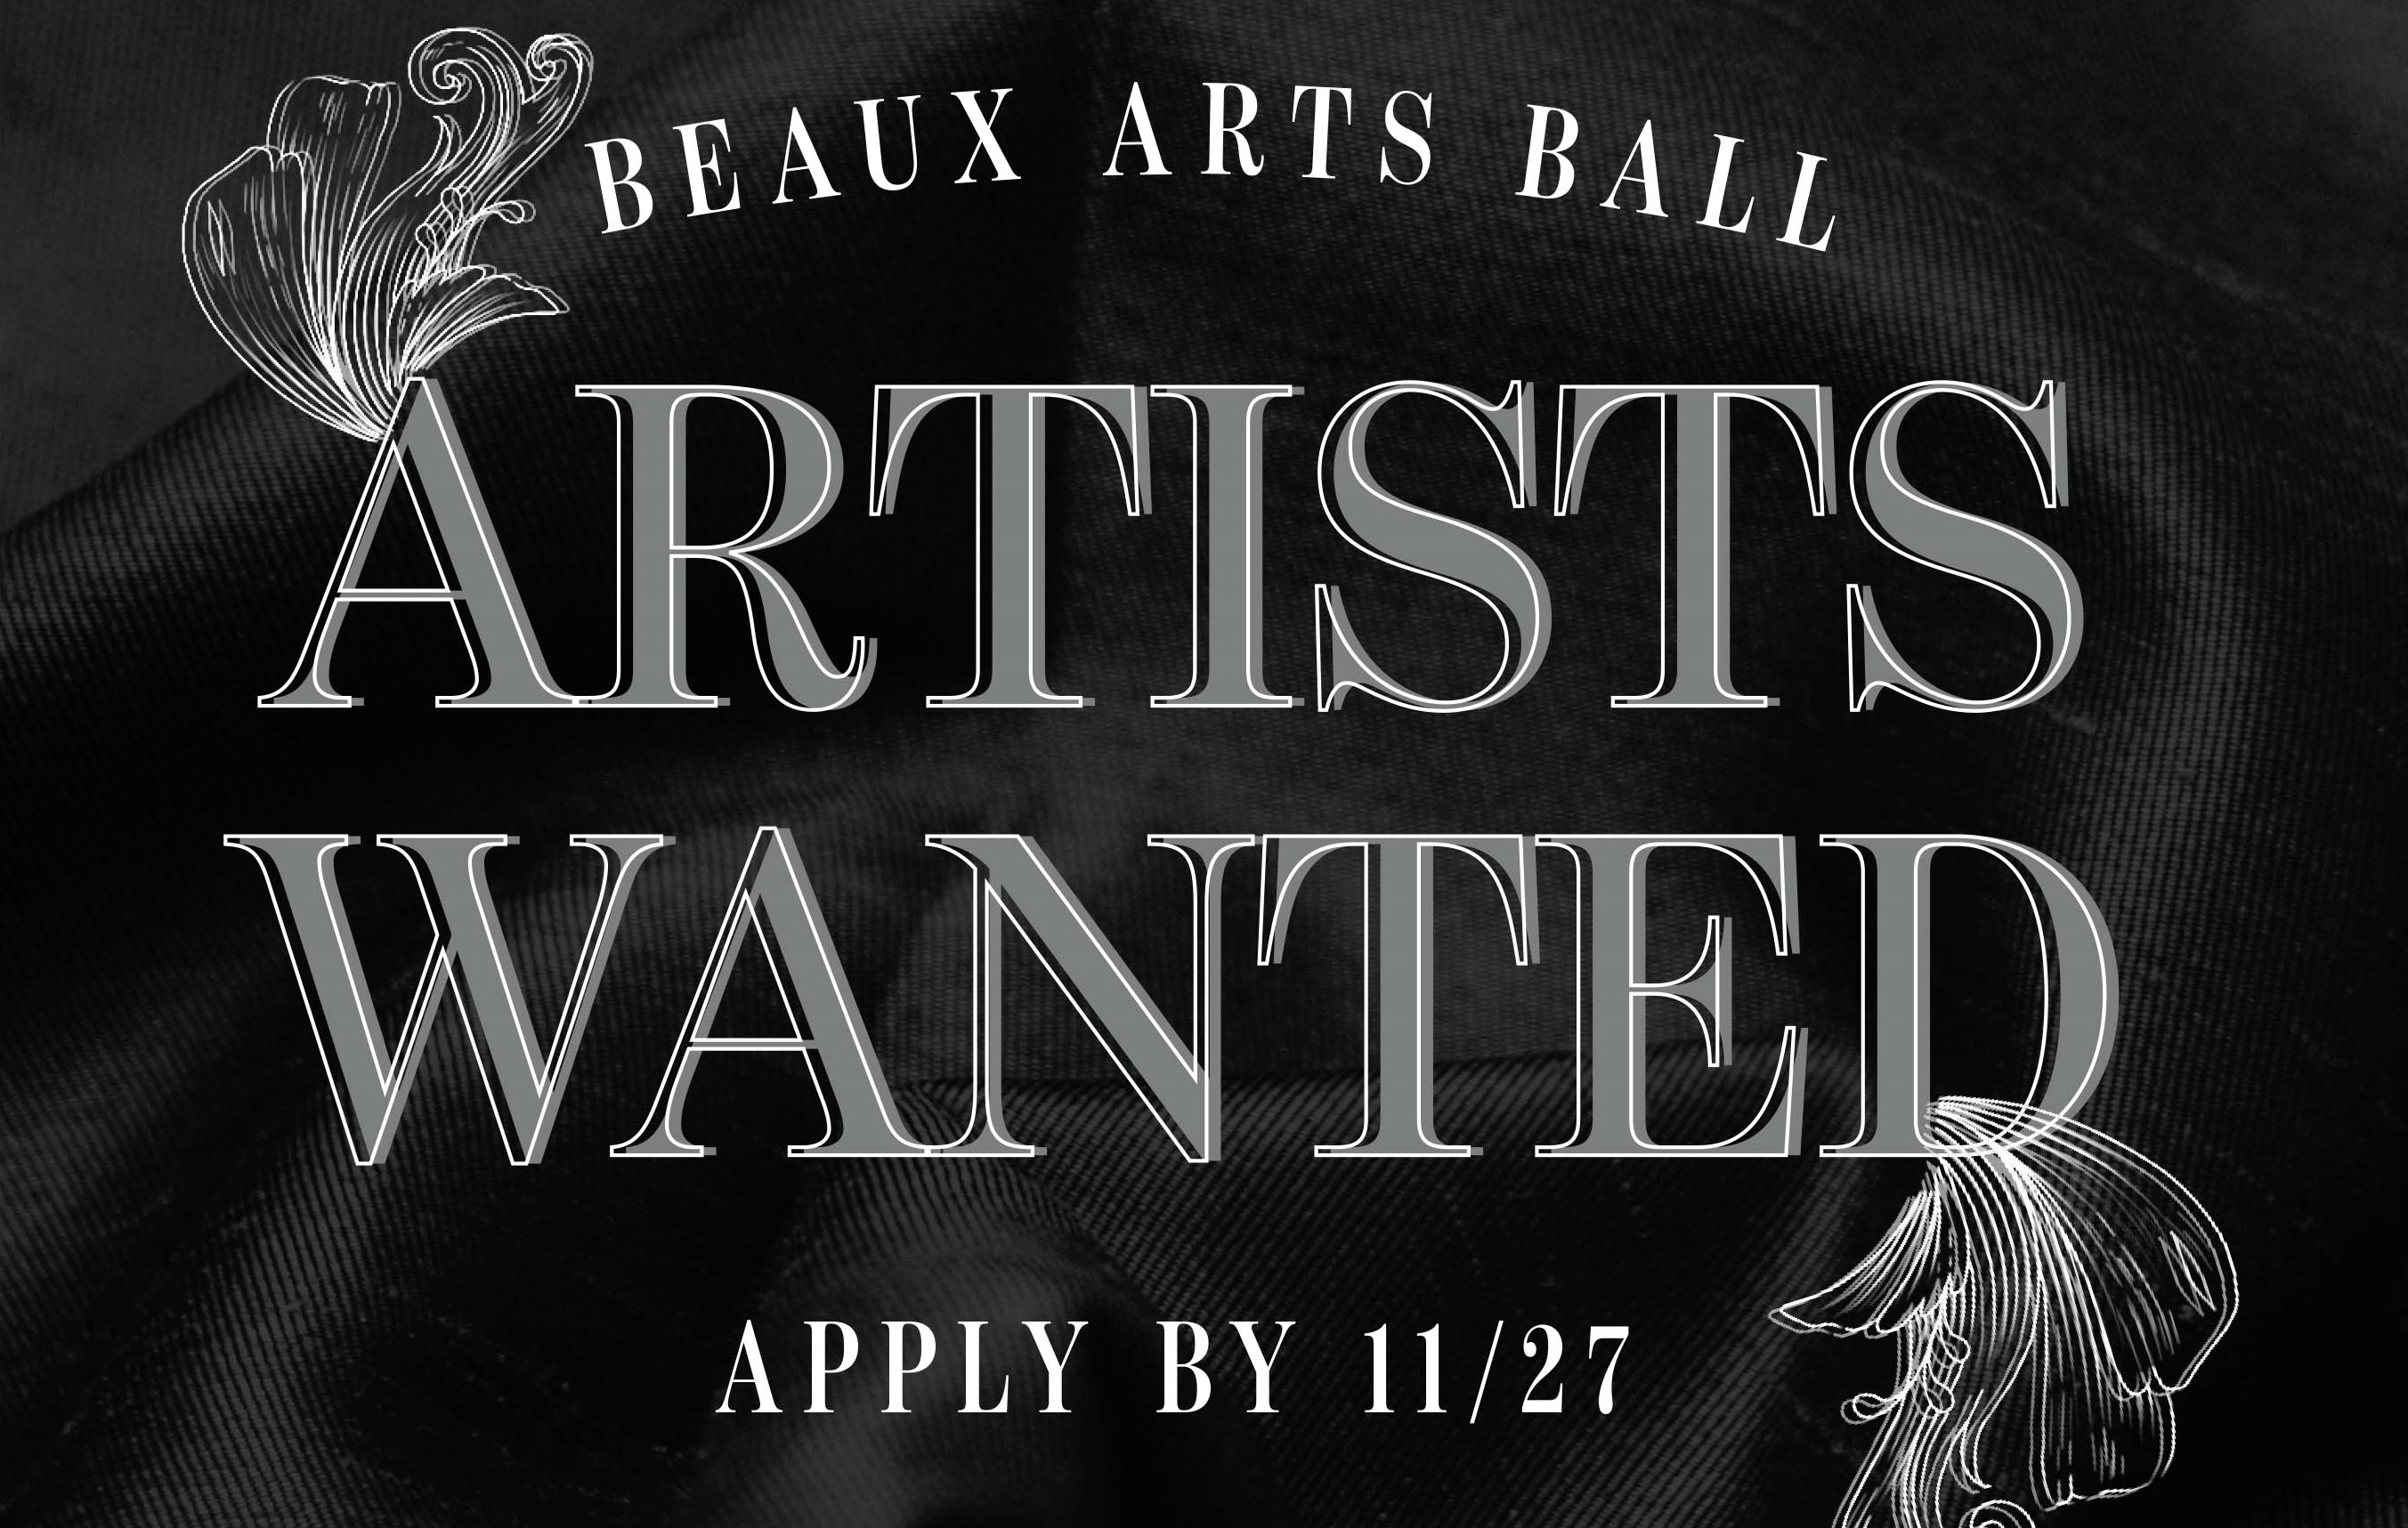 Call for artists for the Beaux Arts Ball